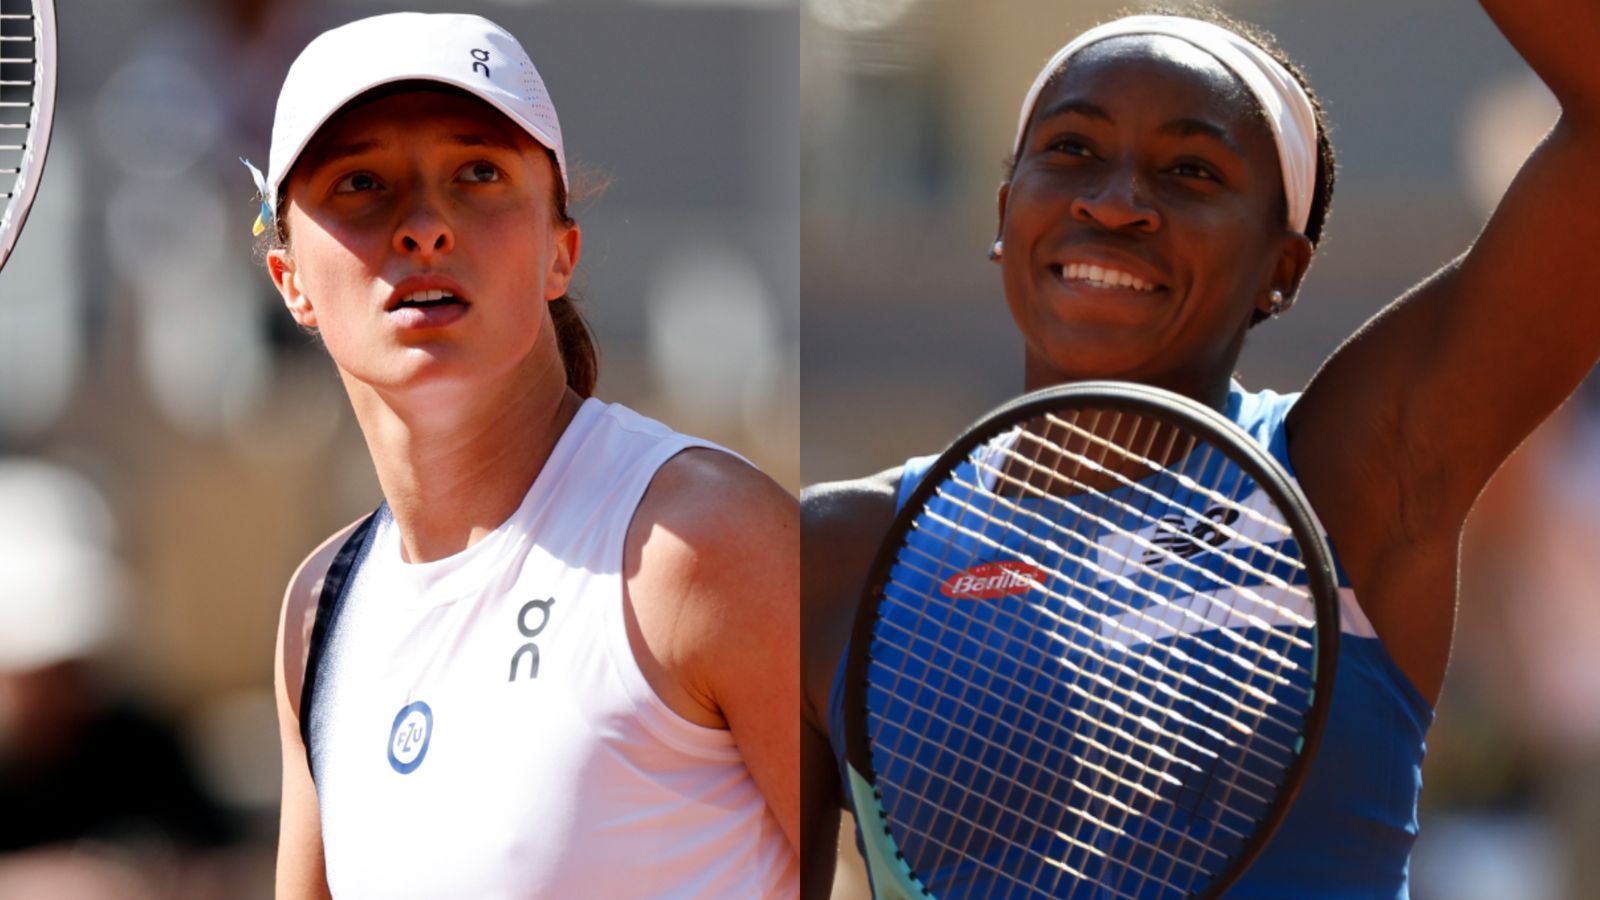 Top seed Swiatek sets up Gauff blockbuster at the French Open